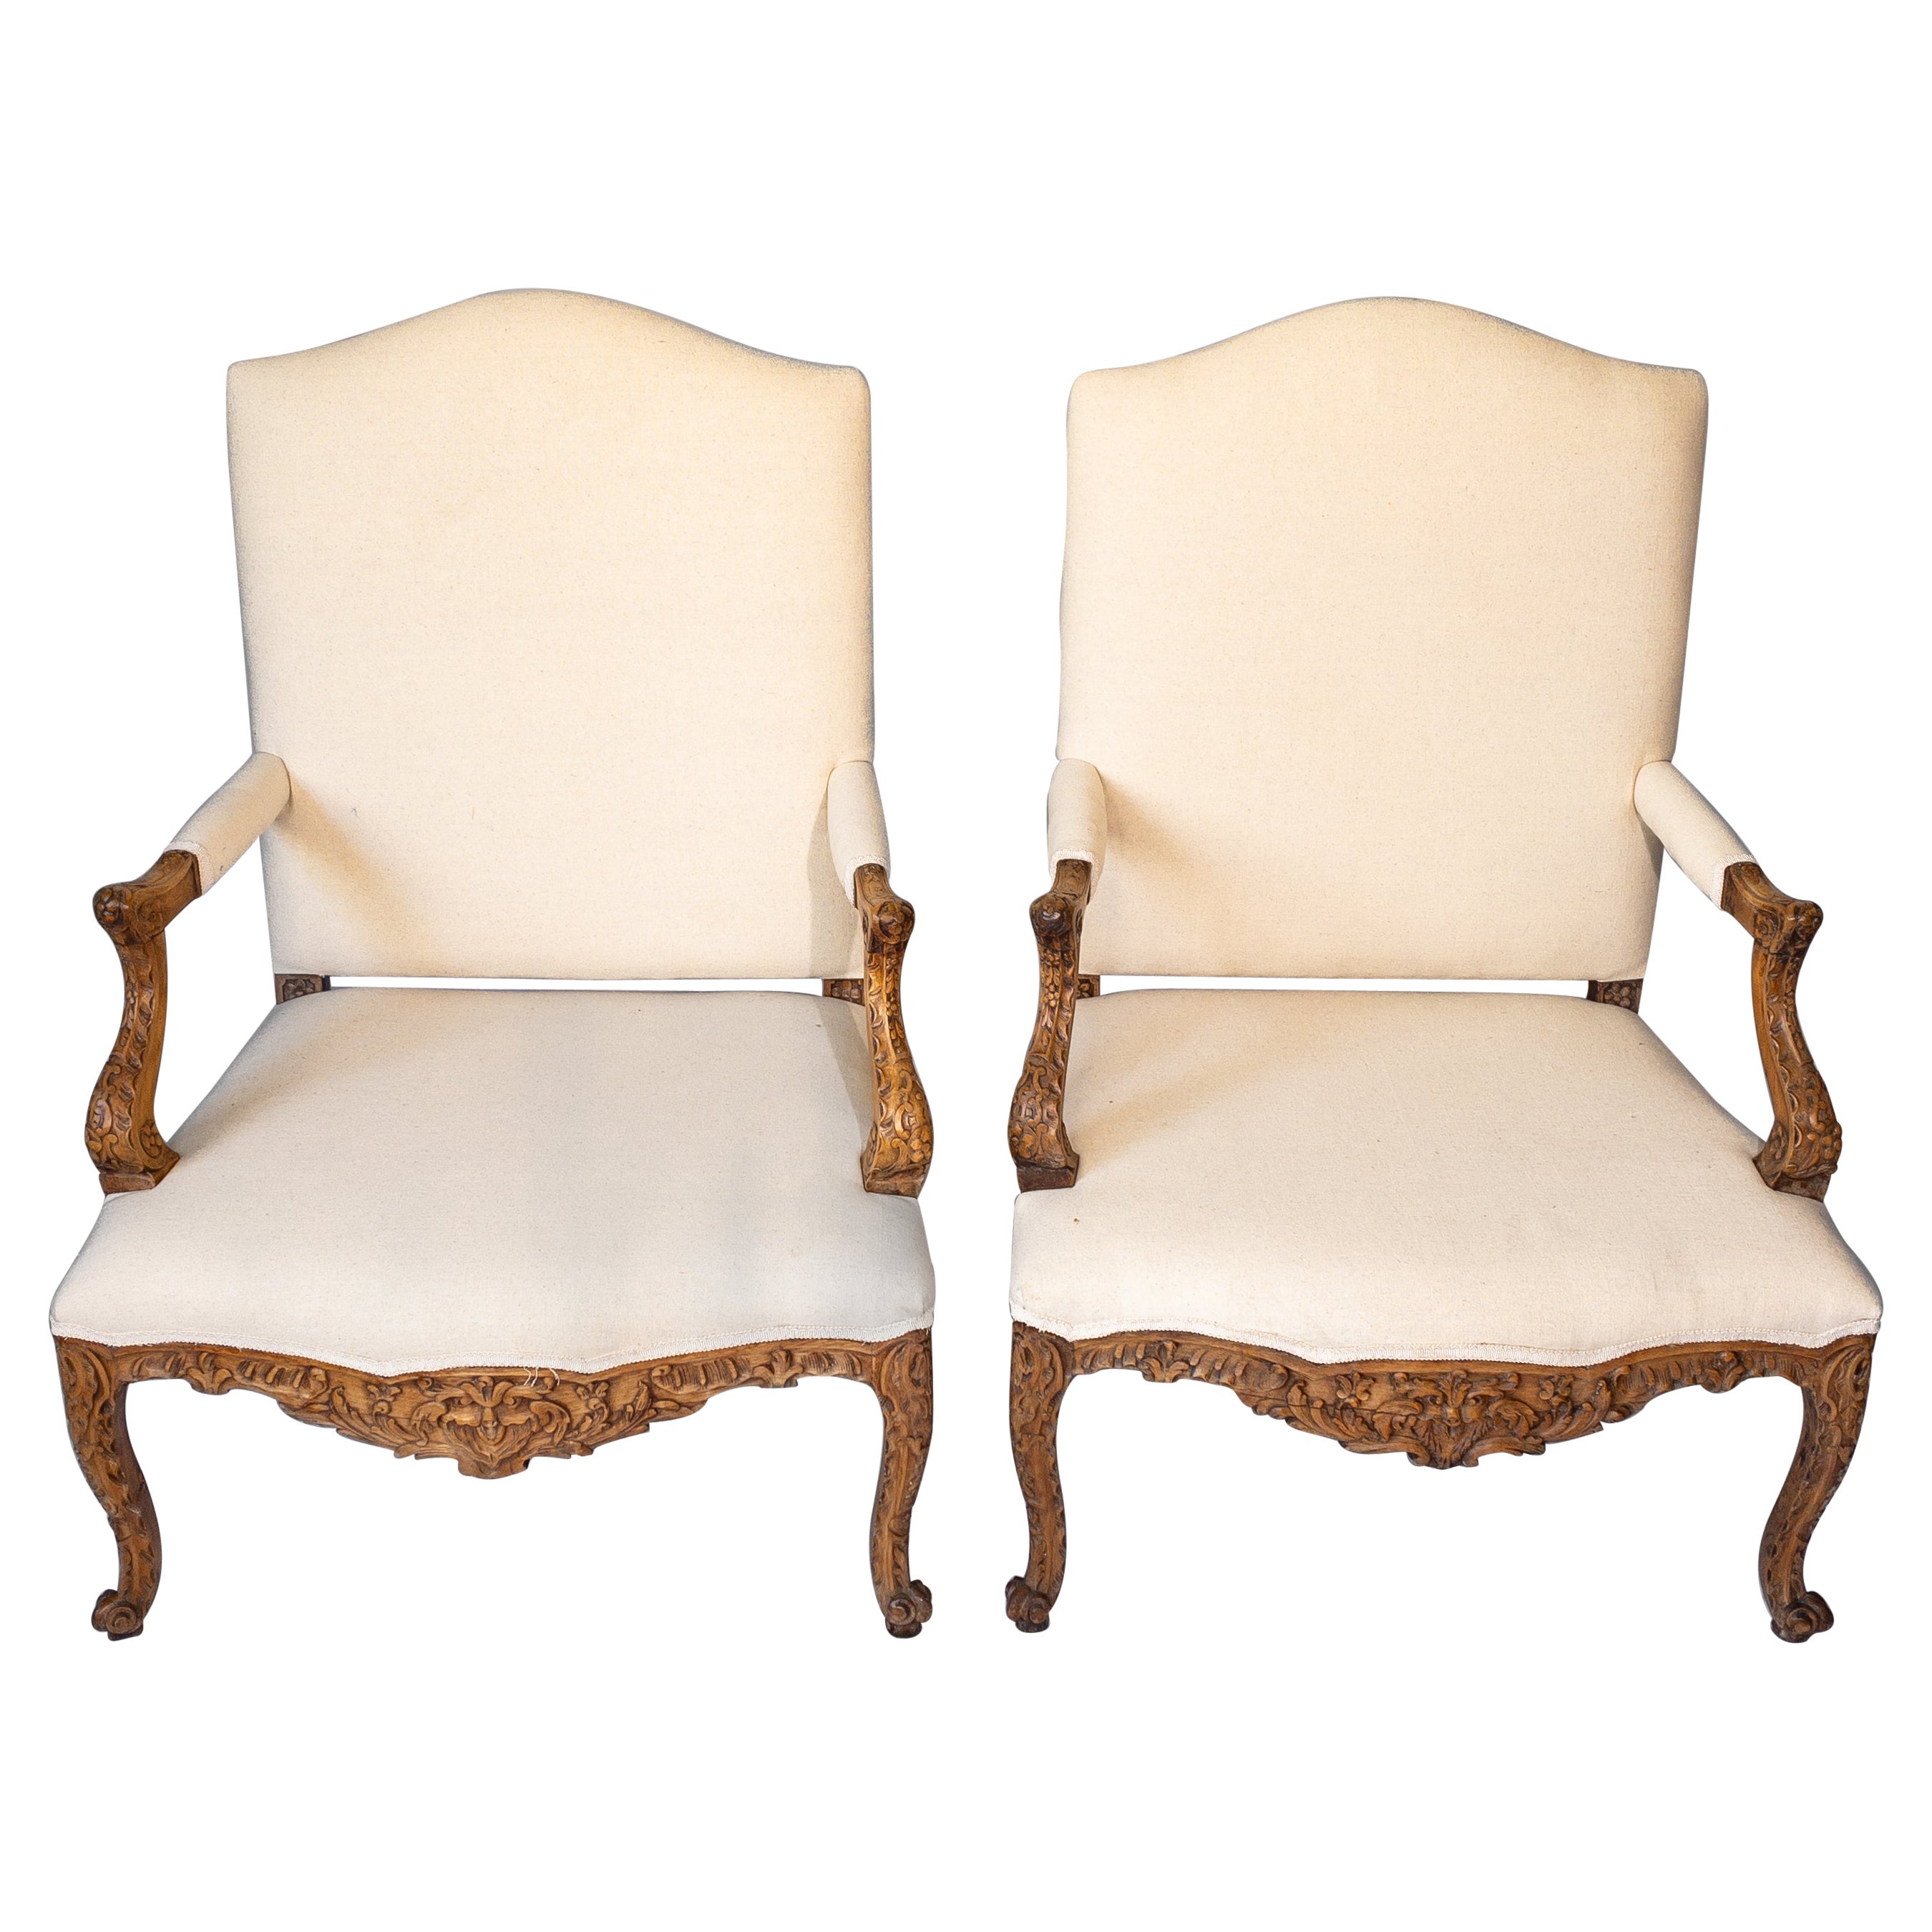 Pair of 19th Century French Louis XV Style Carved Wooden Arm Chairs